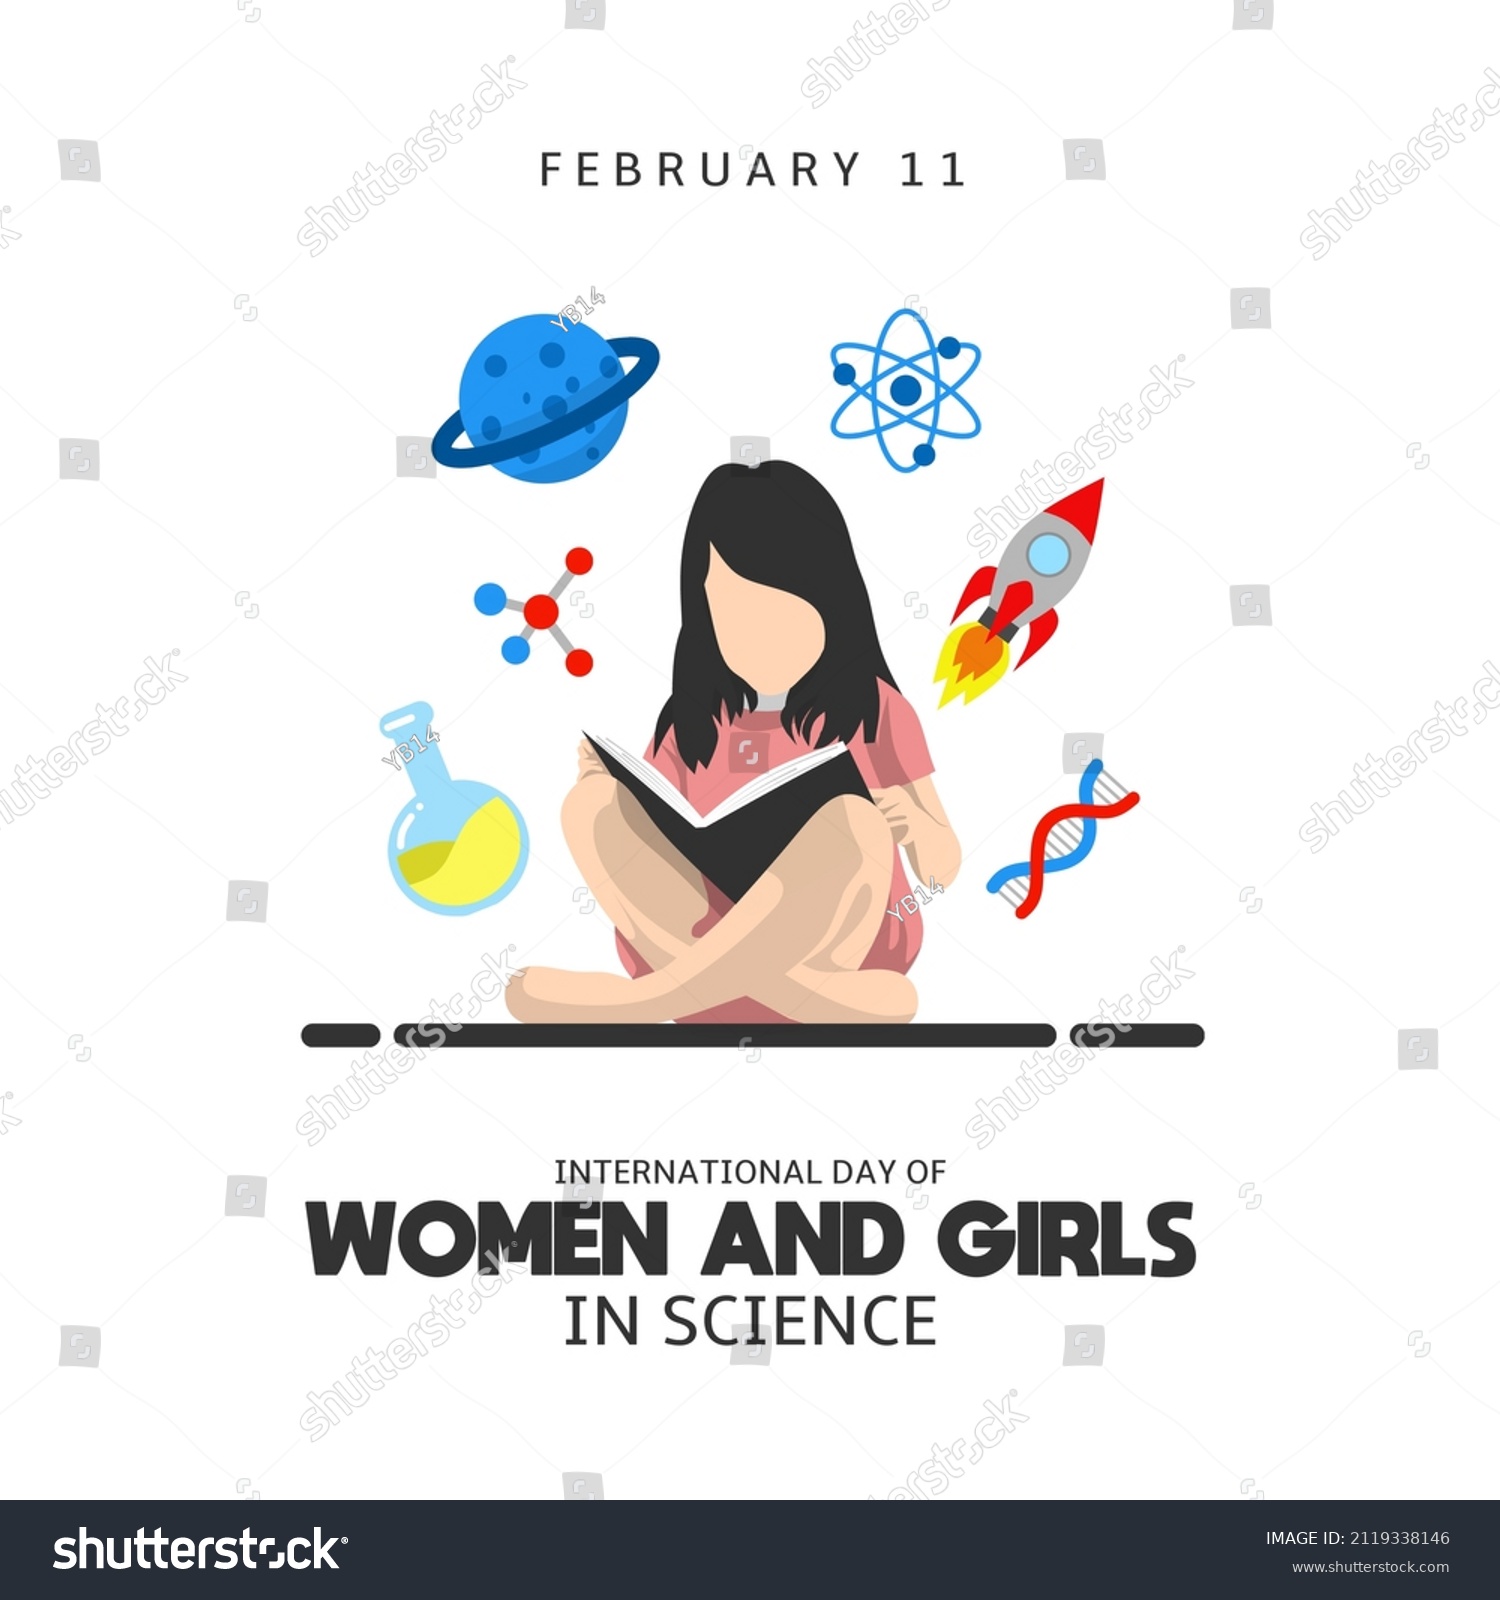 International day of women and girls in Science theme vector illustration. Suitable for Poster, Banners, campaign and greeting card. #2119338146